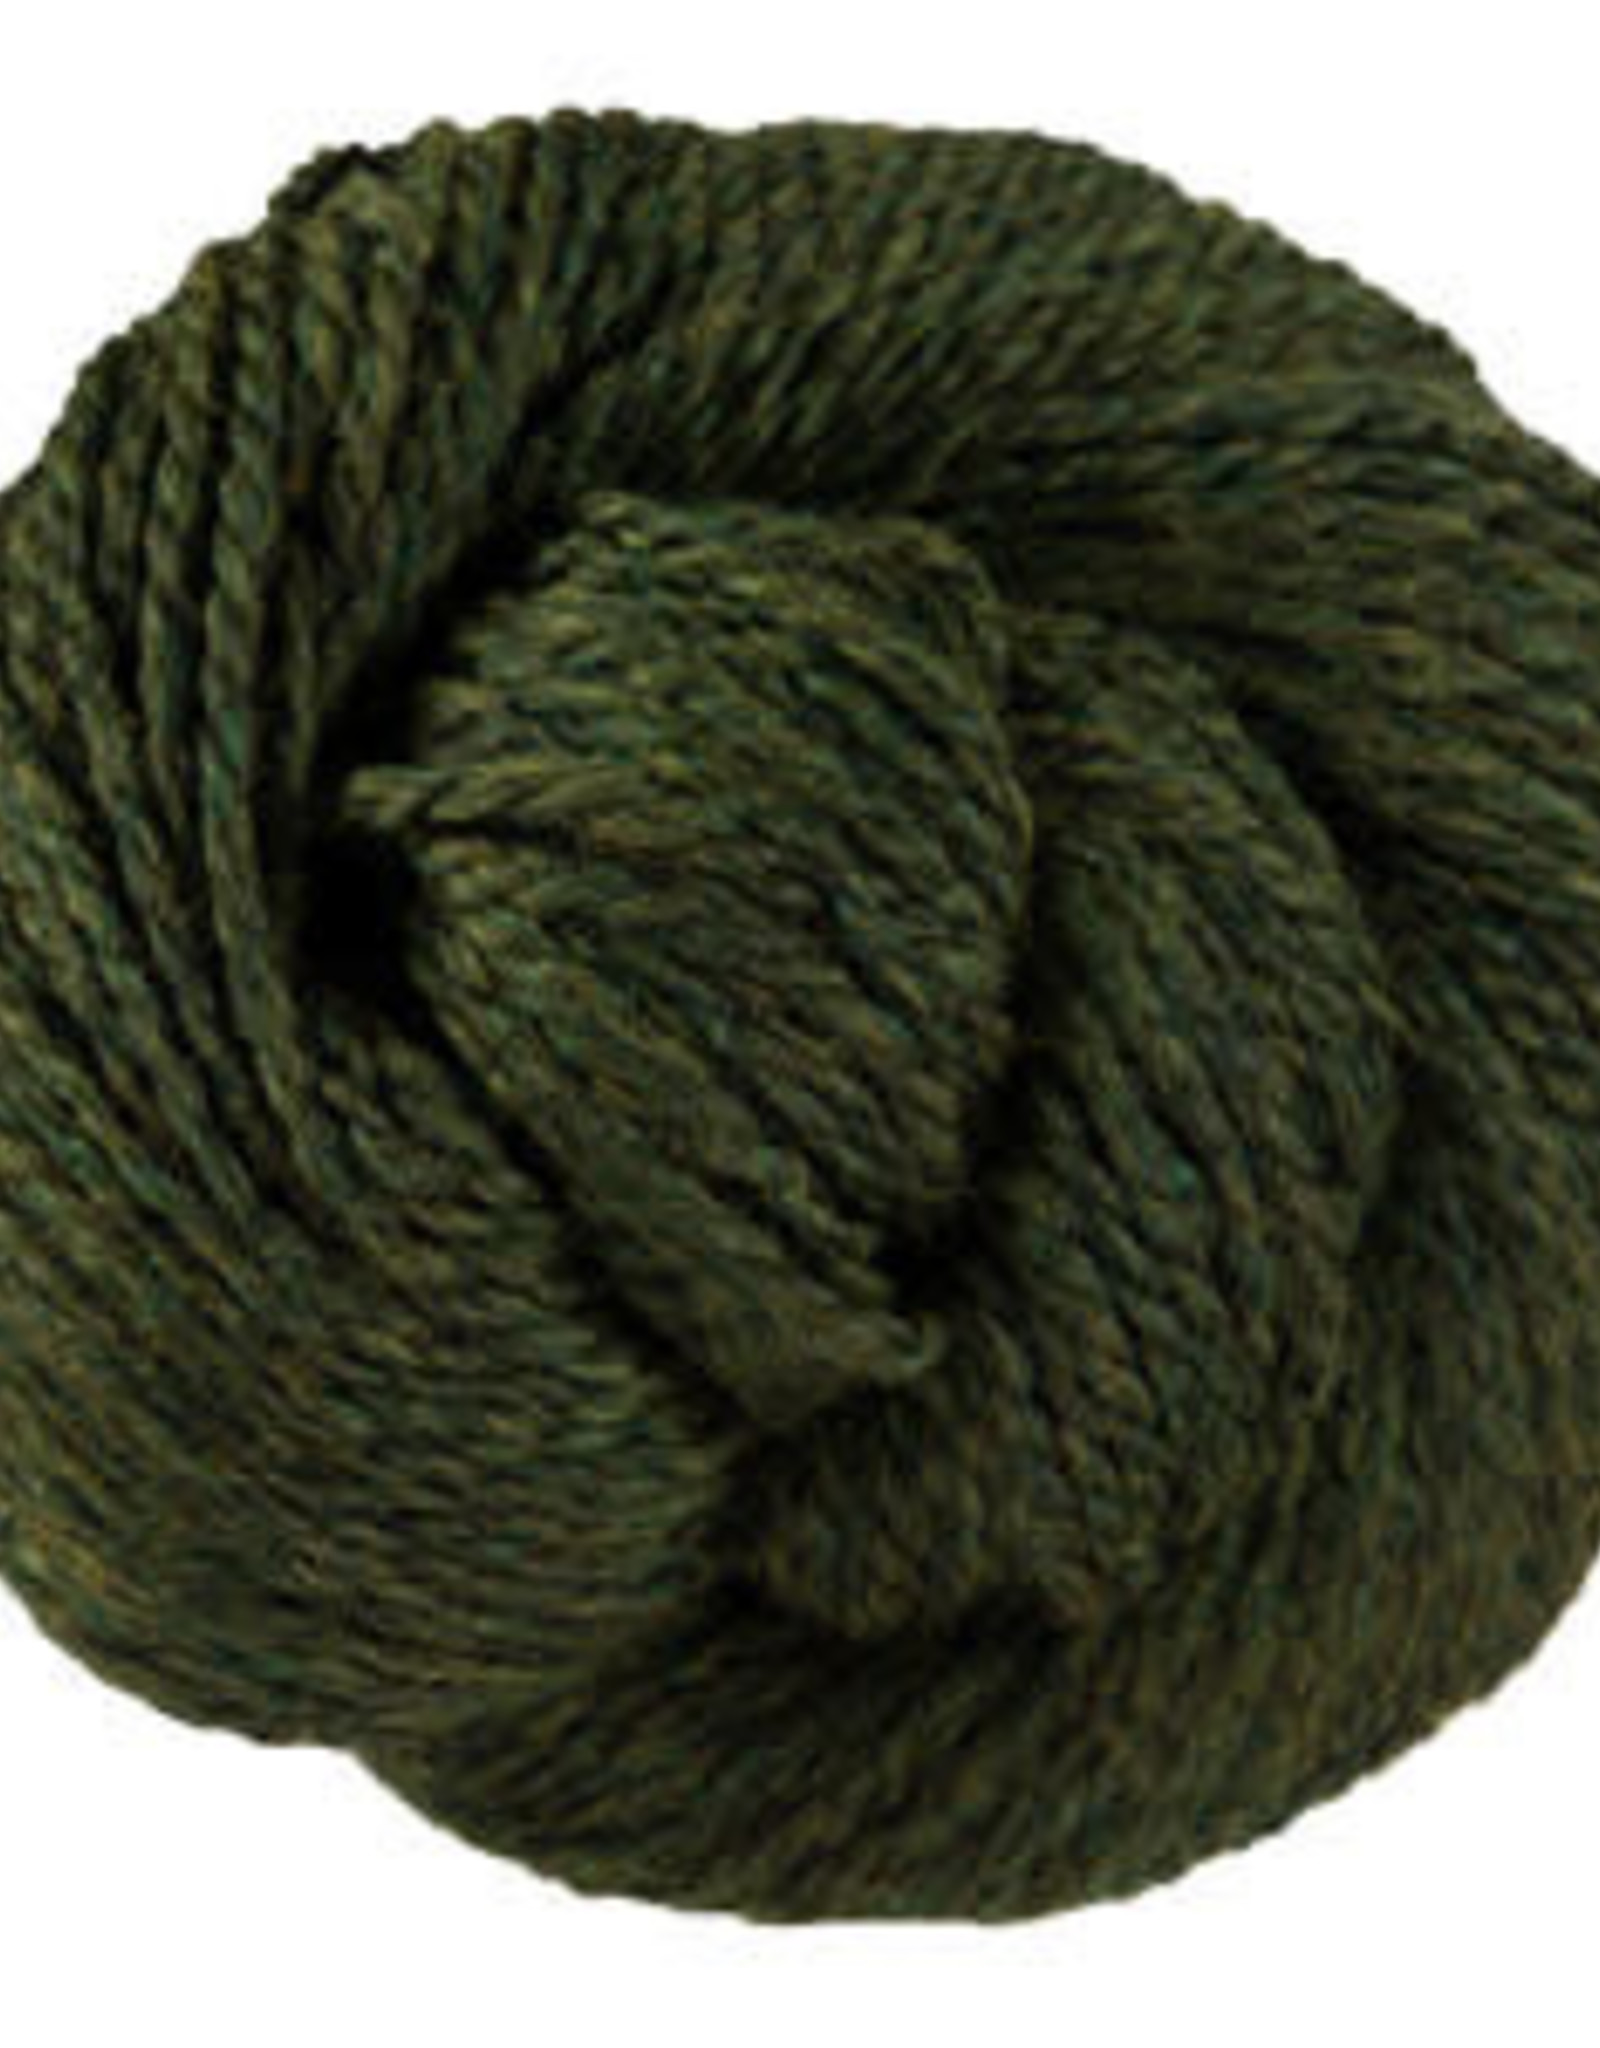 Blue Sky Woolstok - Worsted Weight 50g